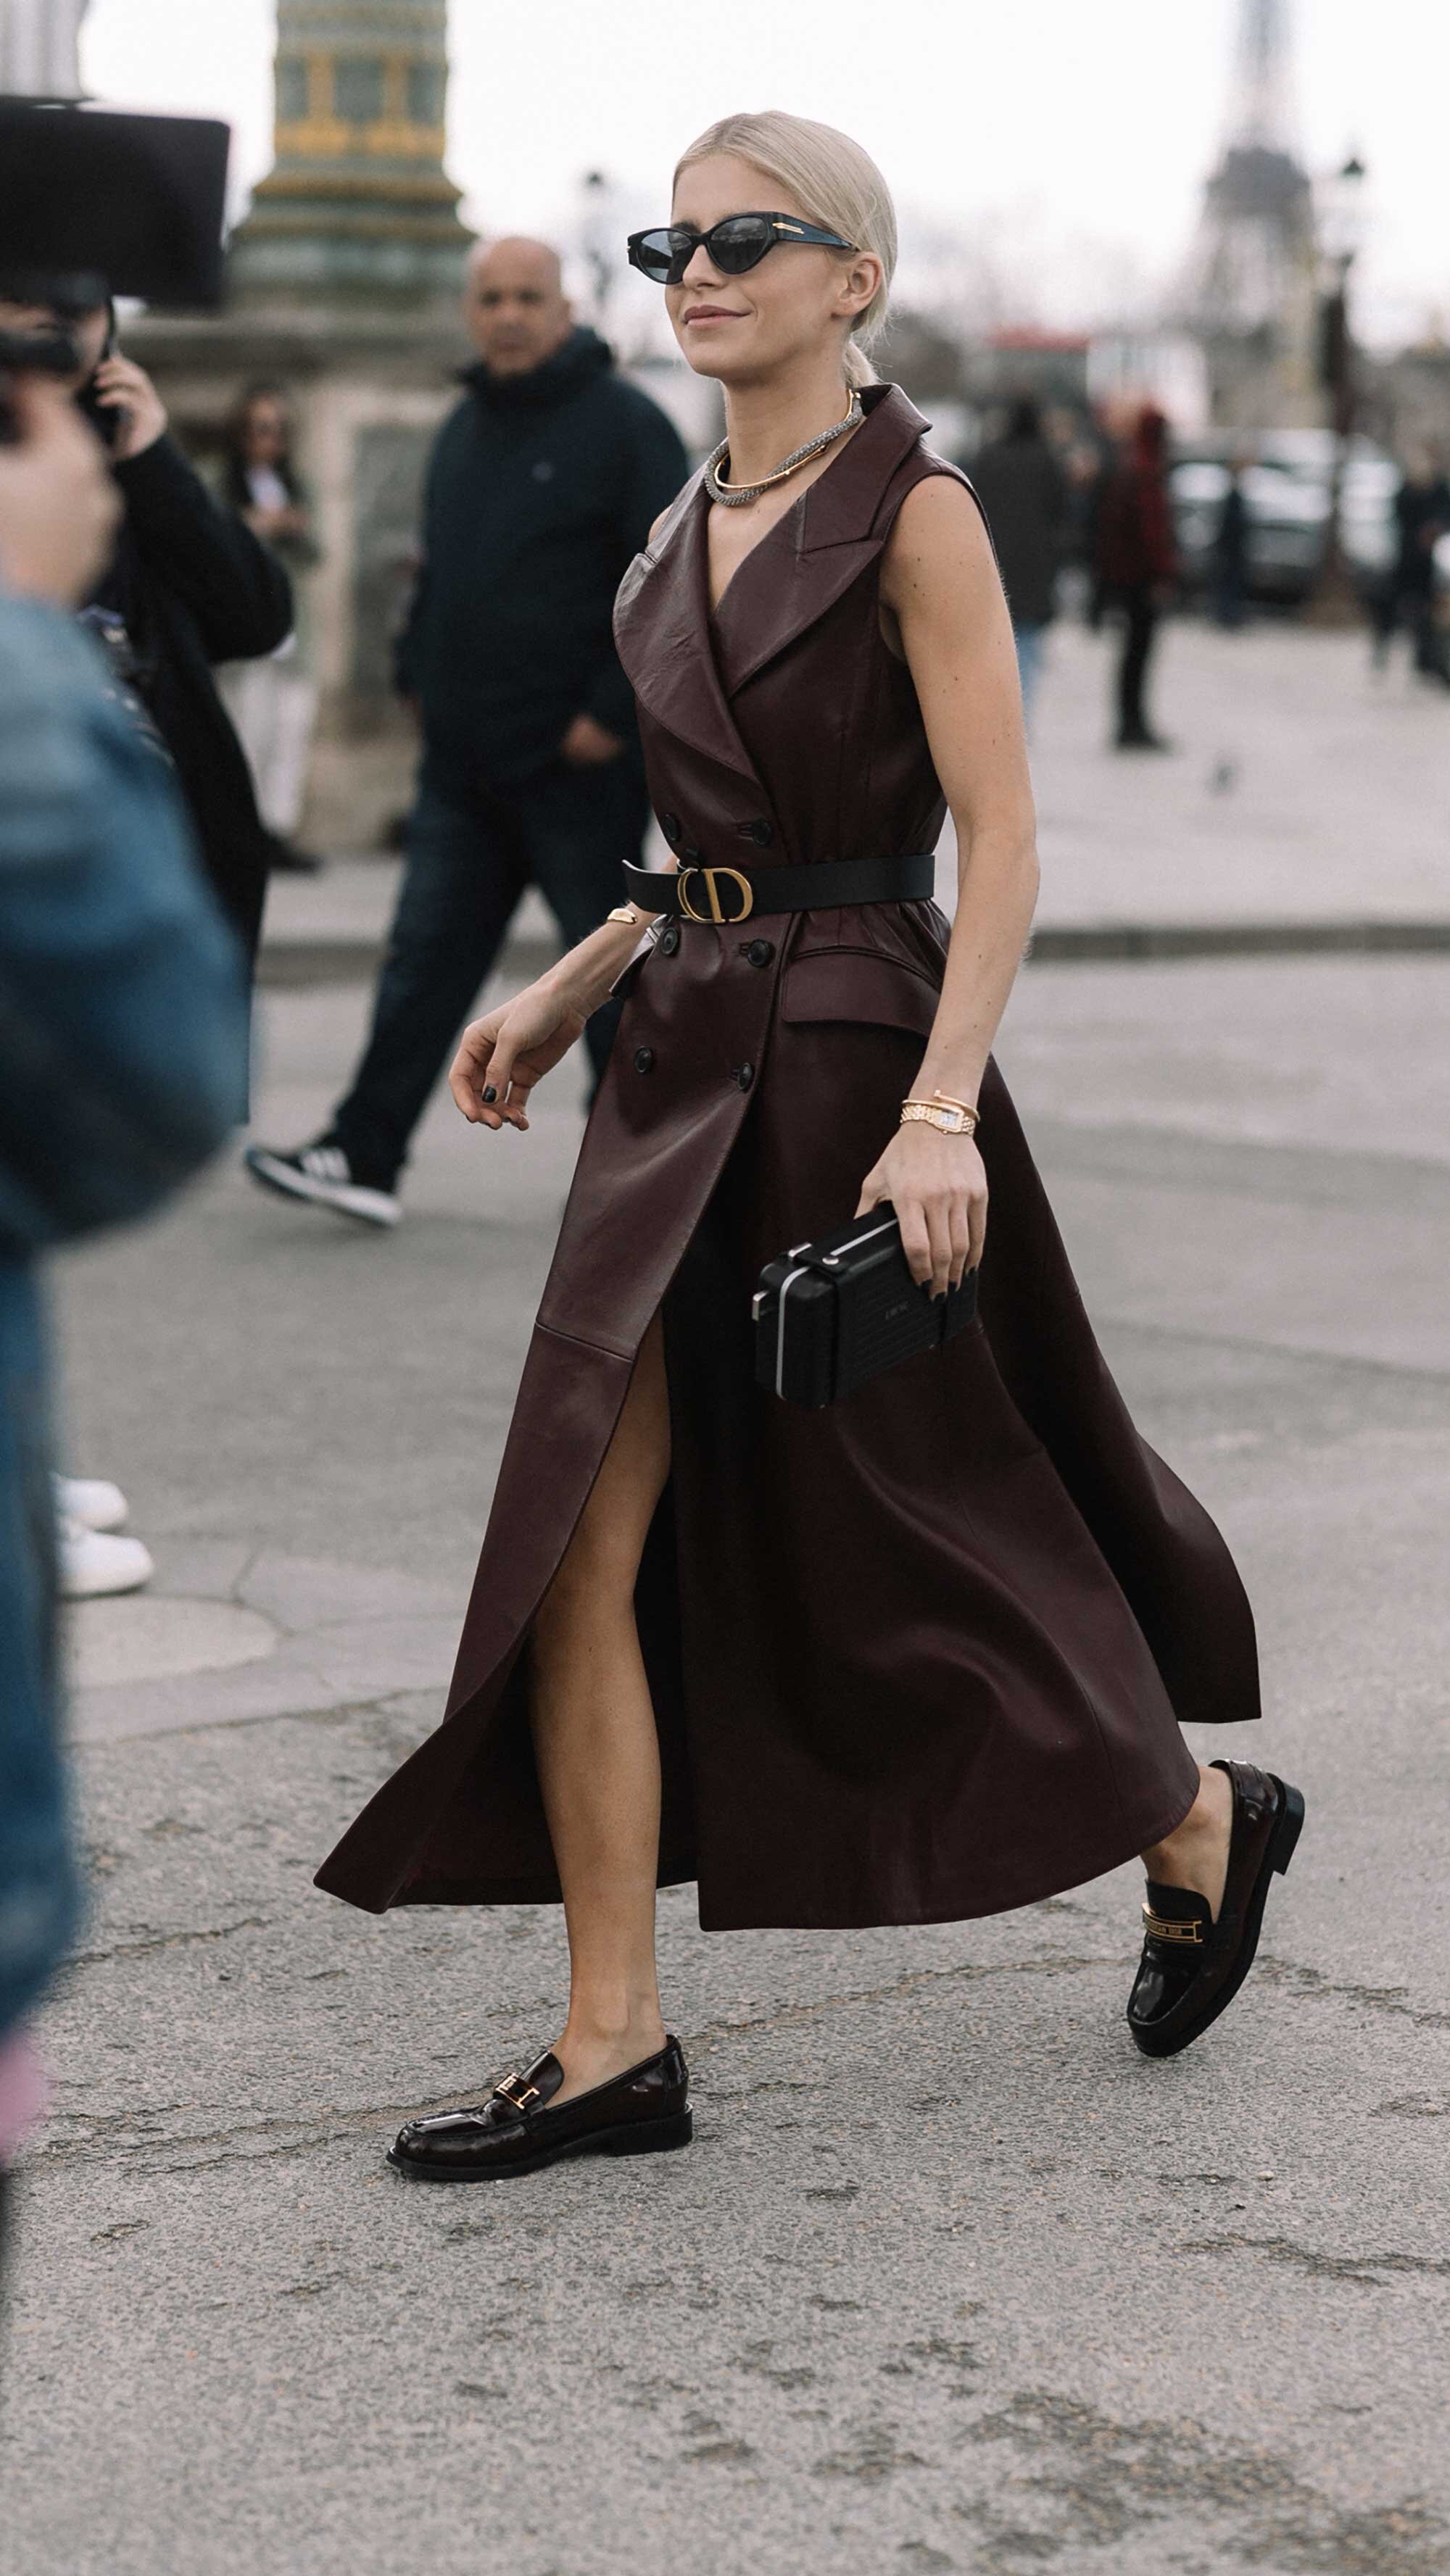 Best outfits Dior Show during Paris Fashion Week Street Style Day One -27.jpg